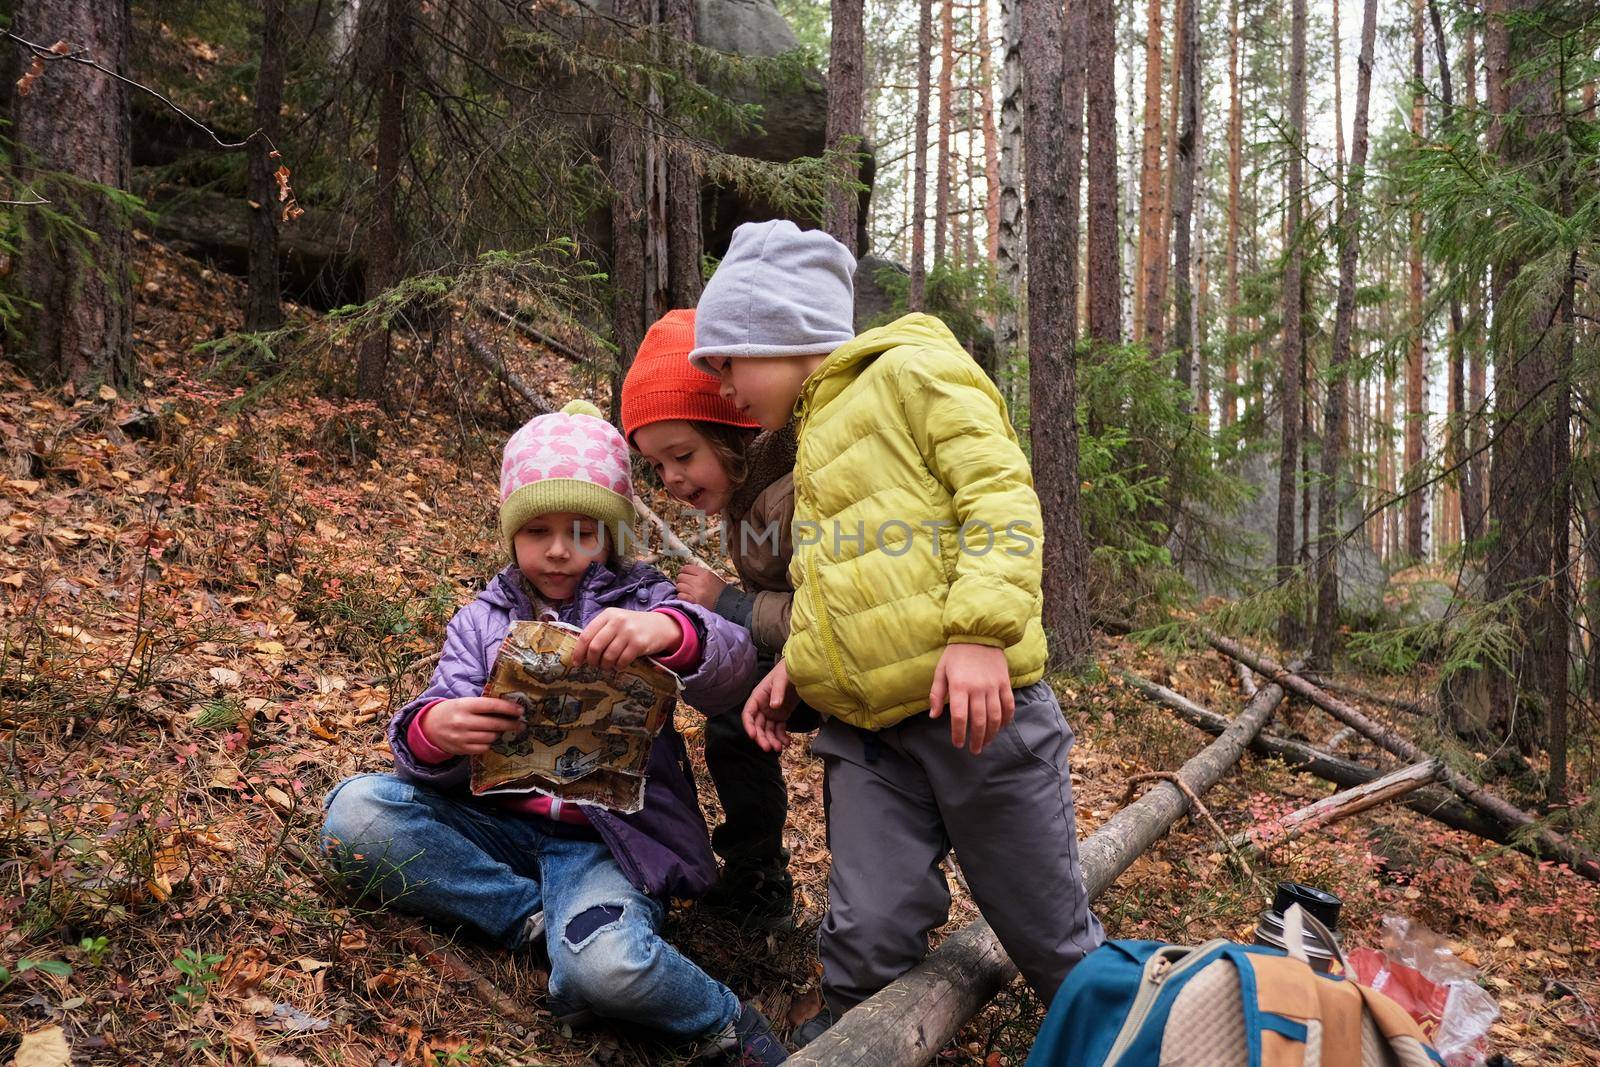 Group of children in warm outerwear examining map while sitting in woods on fallen leaves during camping in autumn nature